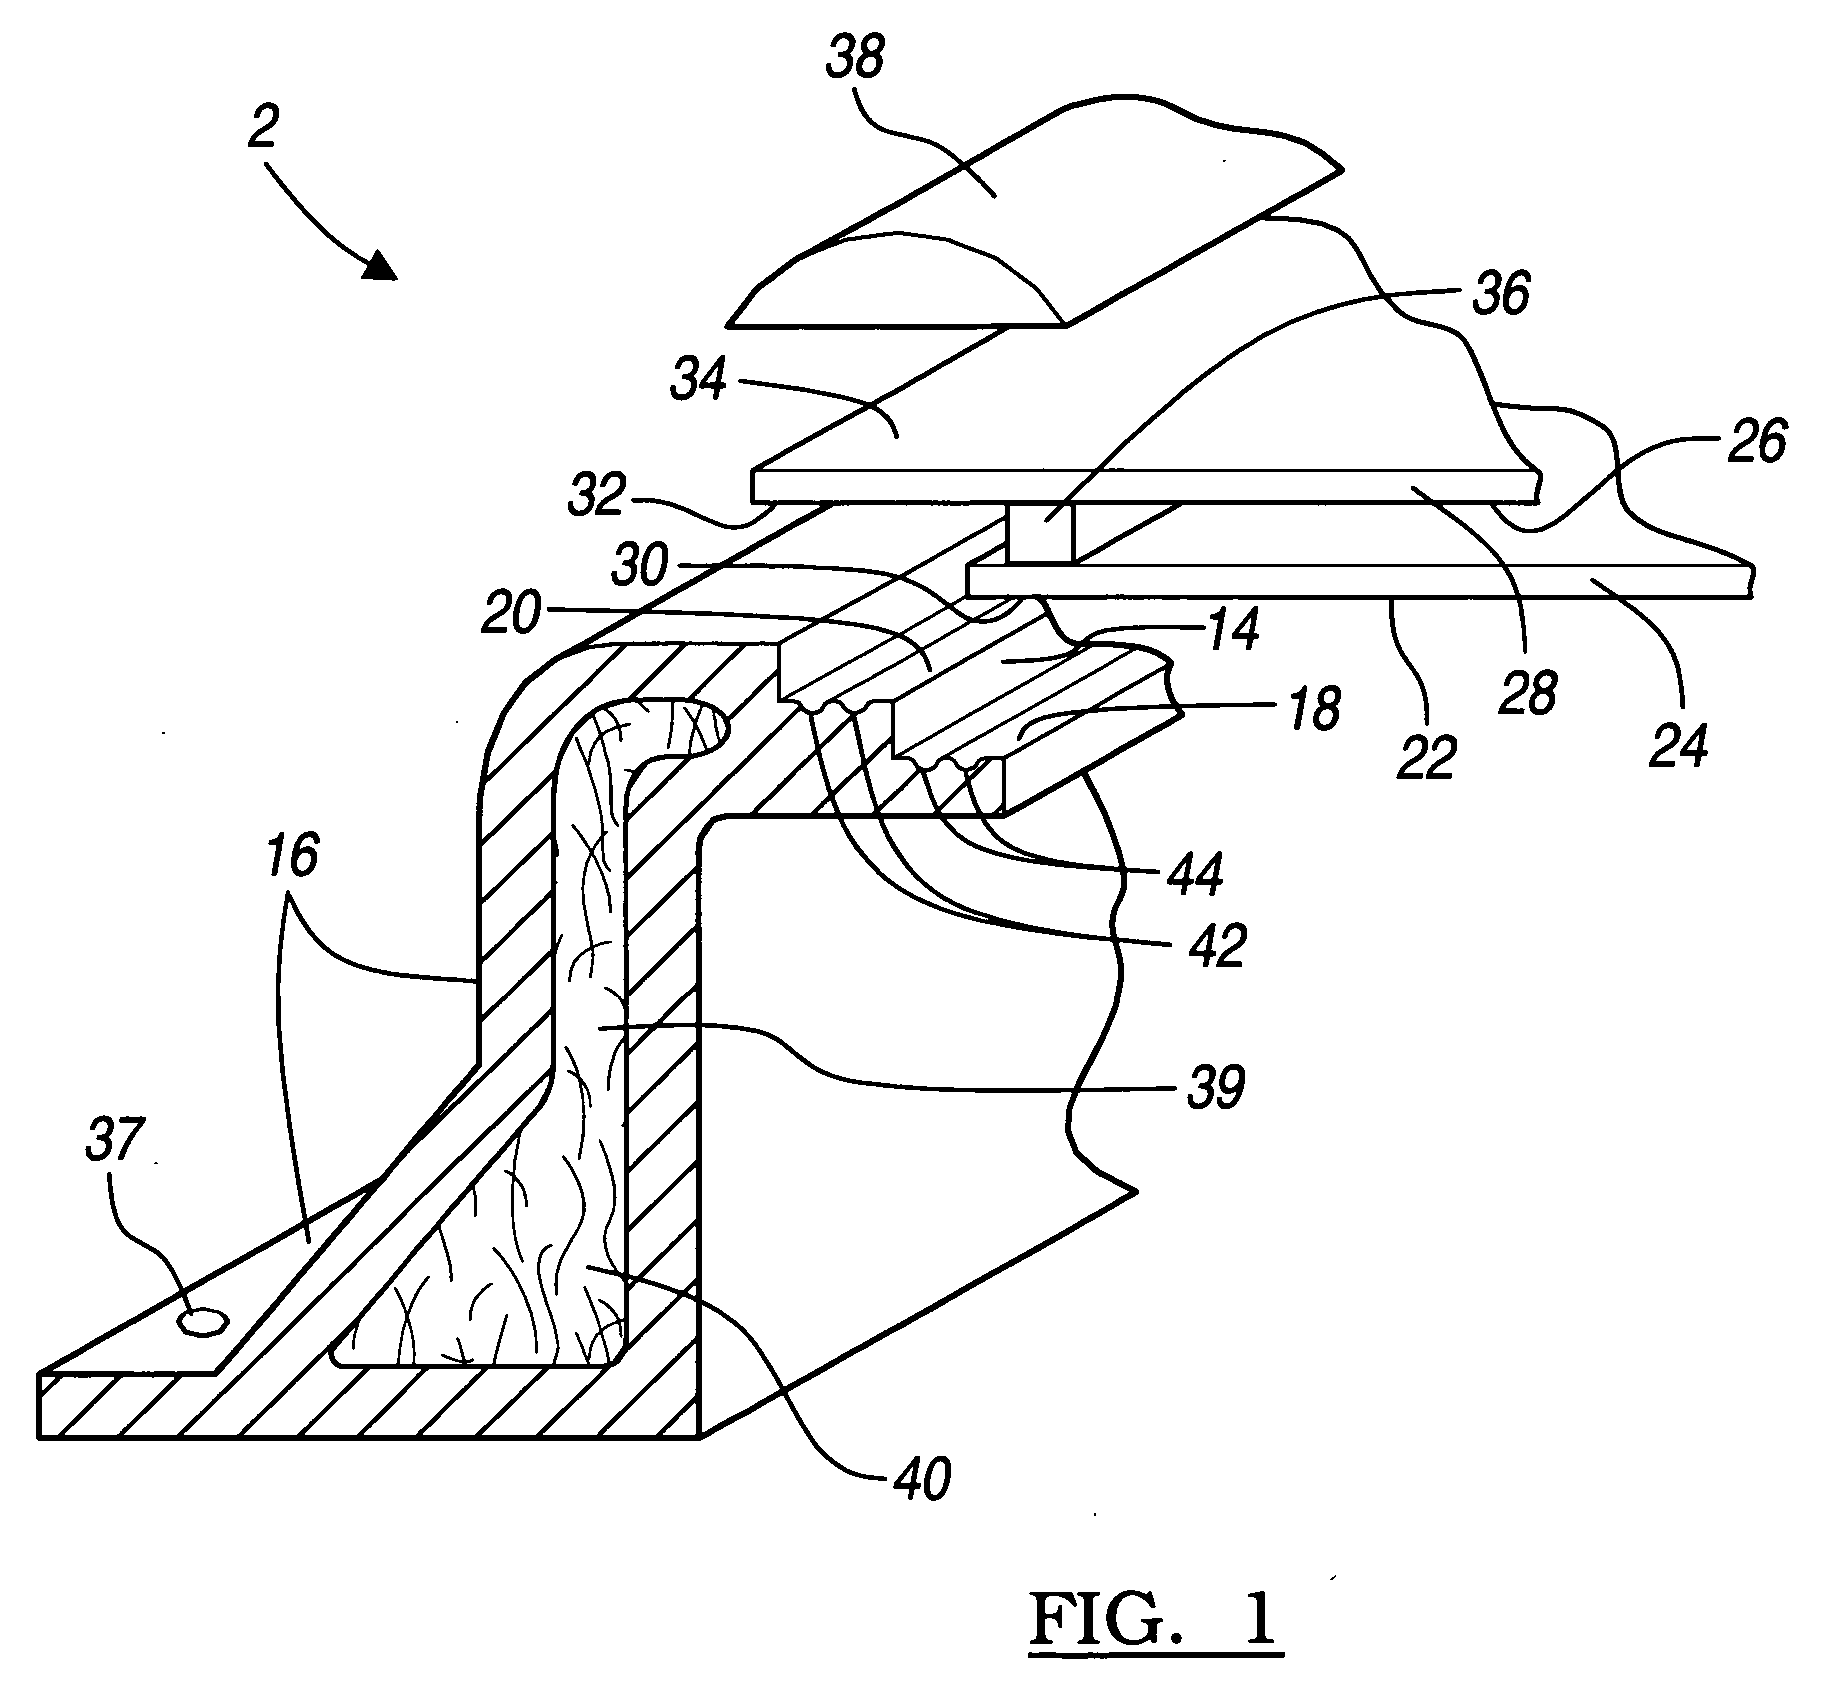 Window-containing assemblies having a molded plastic frame